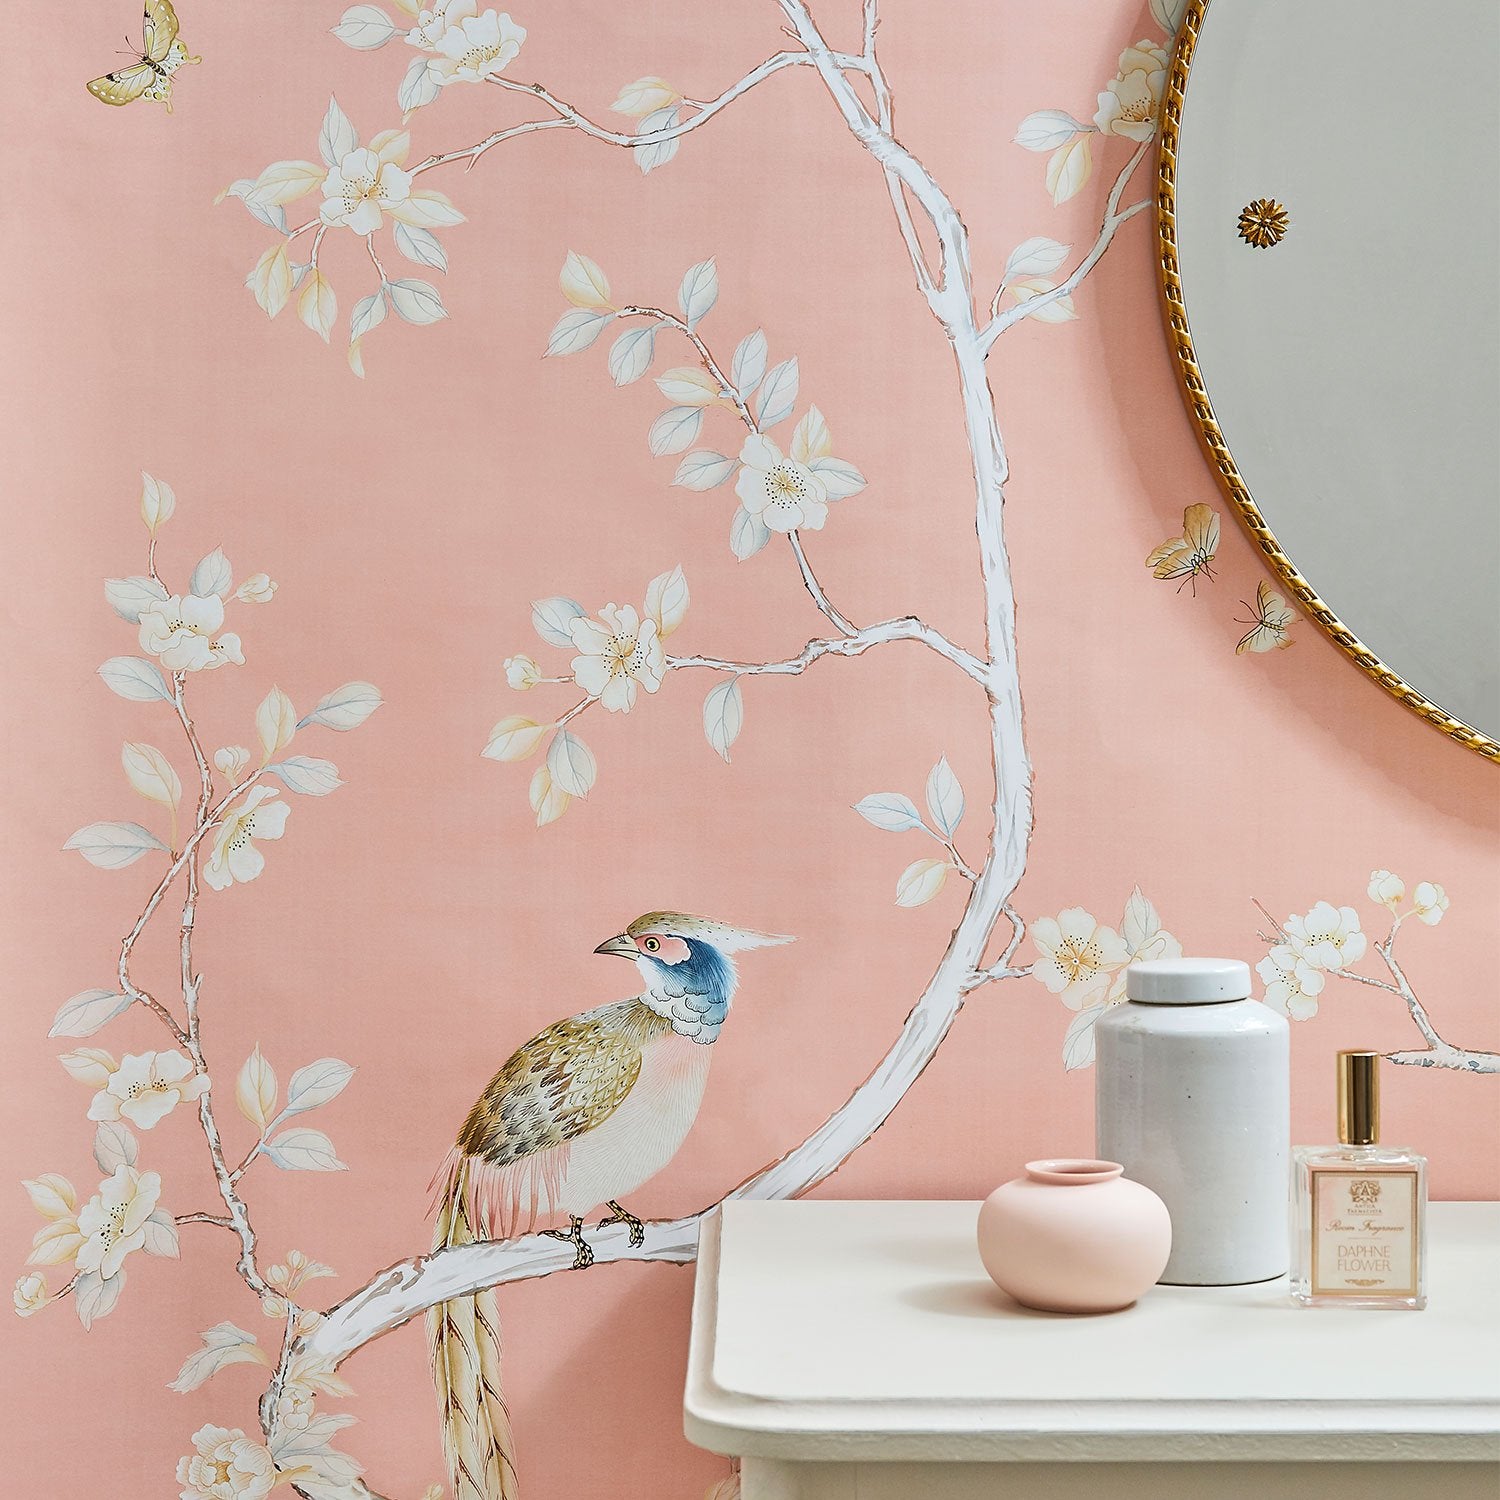 Traditional Chinoiserie Carlisle Wallpaper Mural in Coral in Room